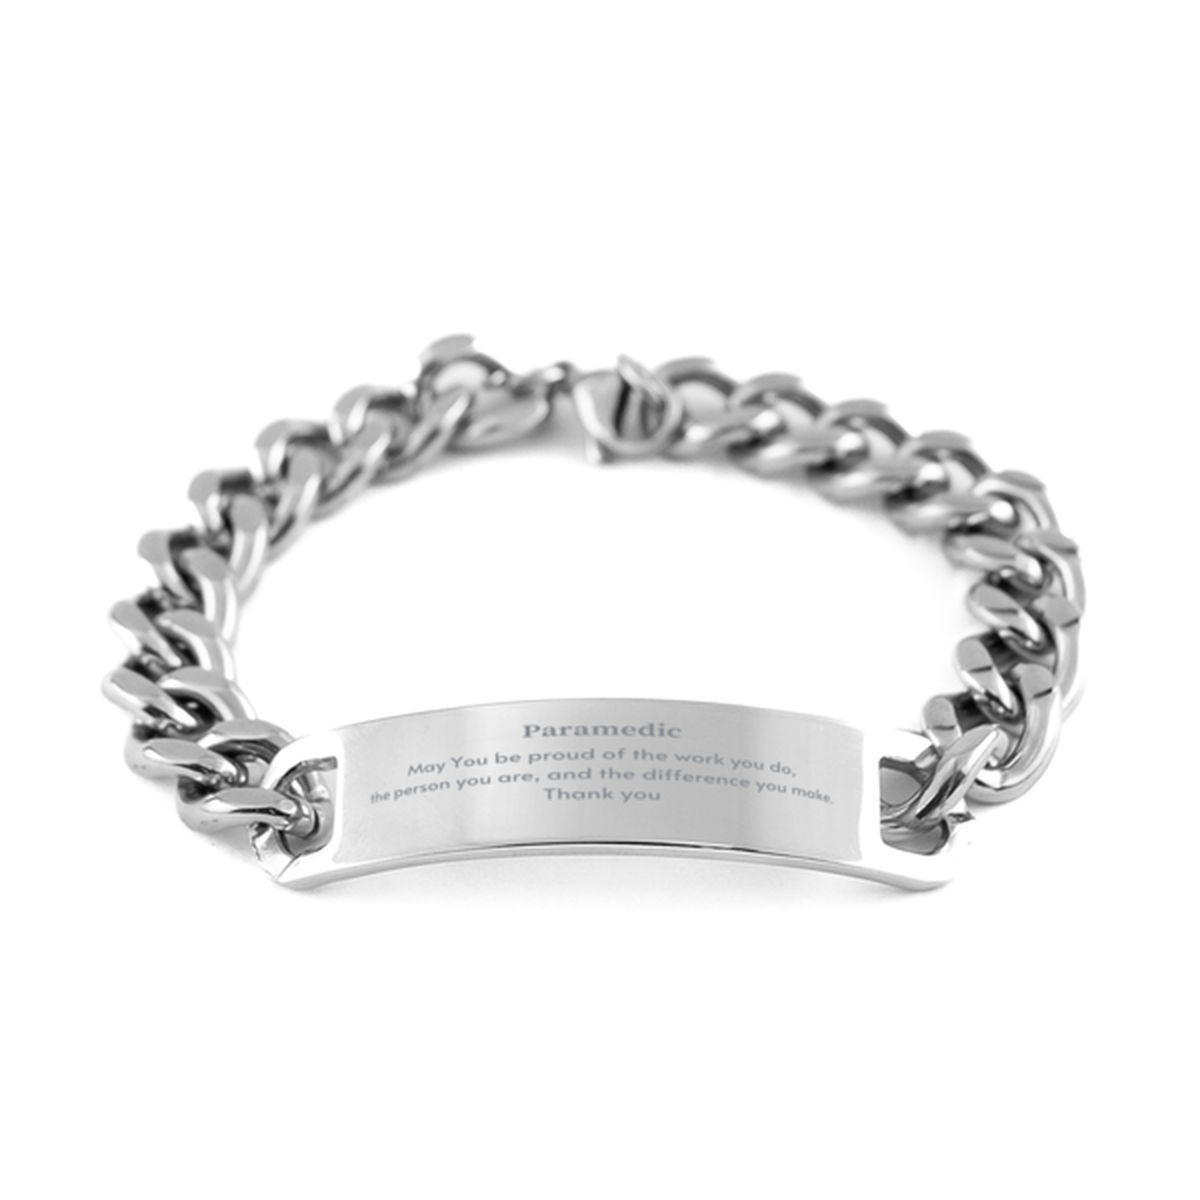 Heartwarming Cuban Chain Stainless Steel Bracelet Retirement Coworkers Gifts for Paramedic, Paramedic May You be proud of the work you do, the person you are Gifts for Boss Men Women Friends